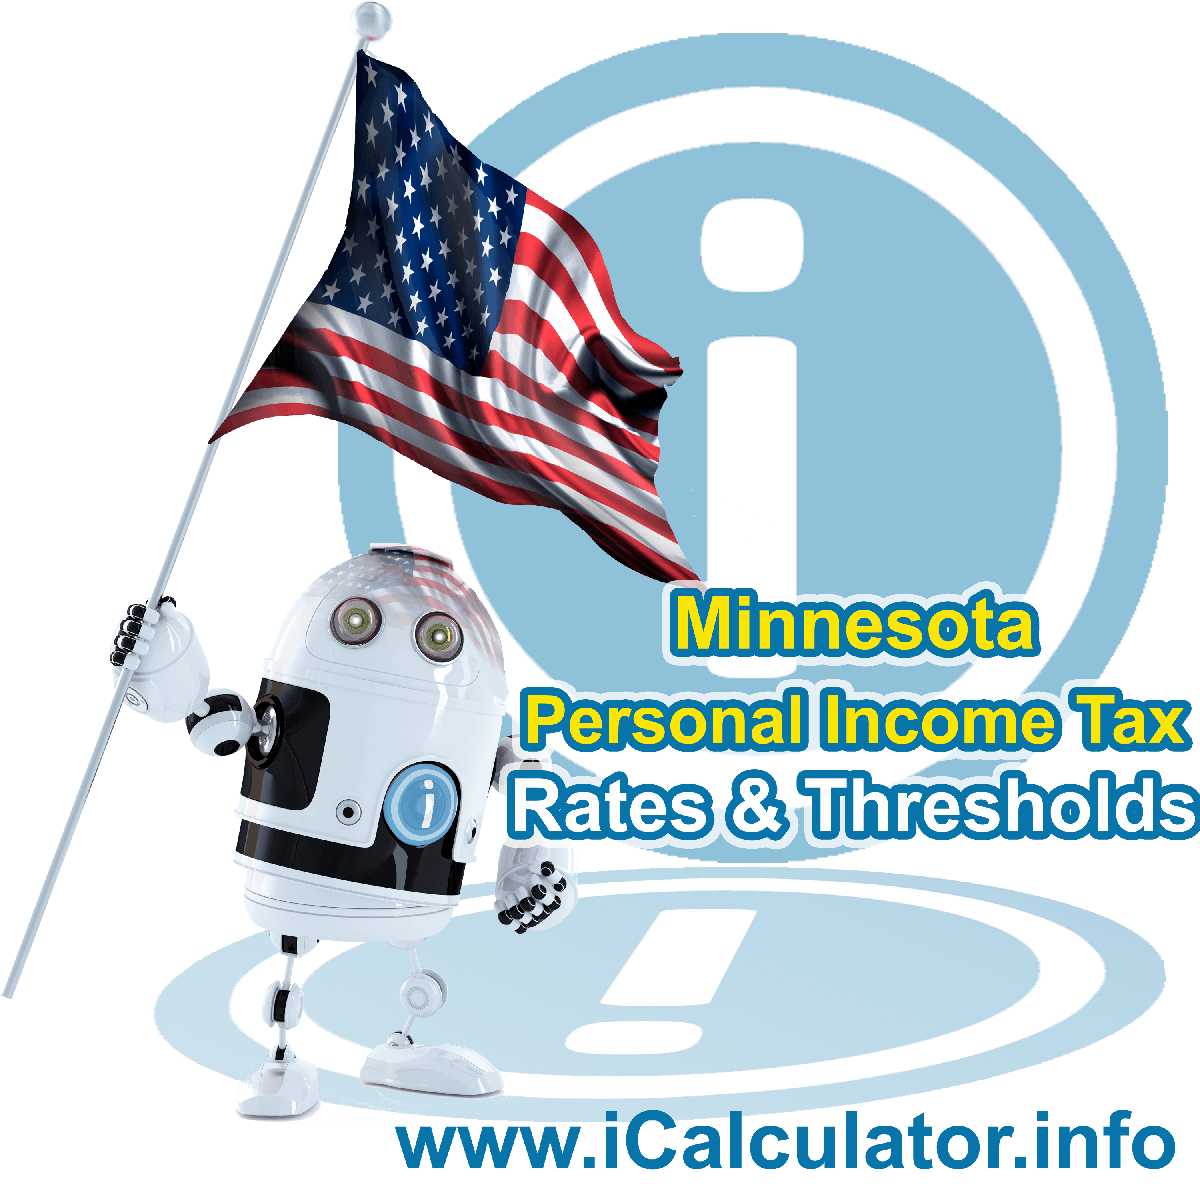 Minnesota State Tax Tables 2014. This image displays details of the Minnesota State Tax Tables for the 2014 tax return year which is provided in support of the 2014 US Tax Calculator